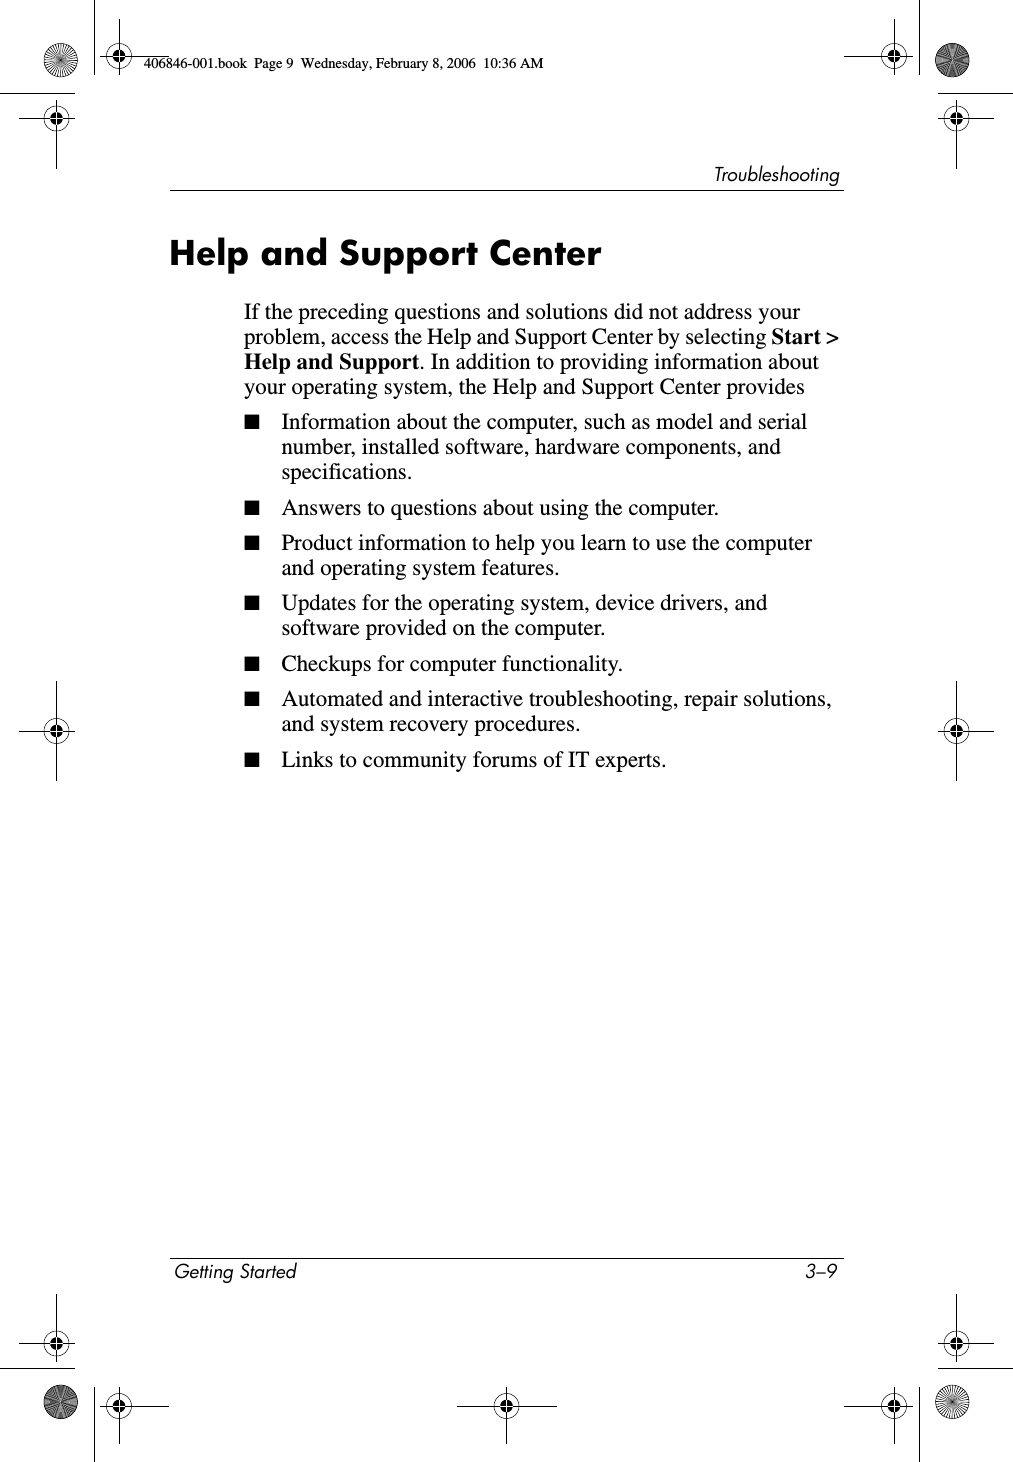 TroubleshootingGetting Started 3–9Help and Support CenterIf the preceding questions and solutions did not address your problem, access the Help and Support Center by selecting Start &gt; Help and Support. In addition to providing information about your operating system, the Help and Support Center provides■Information about the computer, such as model and serial number, installed software, hardware components, and specifications.■Answers to questions about using the computer.■Product information to help you learn to use the computer and operating system features.■Updates for the operating system, device drivers, and software provided on the computer.■Checkups for computer functionality.■Automated and interactive troubleshooting, repair solutions, and system recovery procedures.■Links to community forums of IT experts.406846-001.book  Page 9  Wednesday, February 8, 2006  10:36 AM